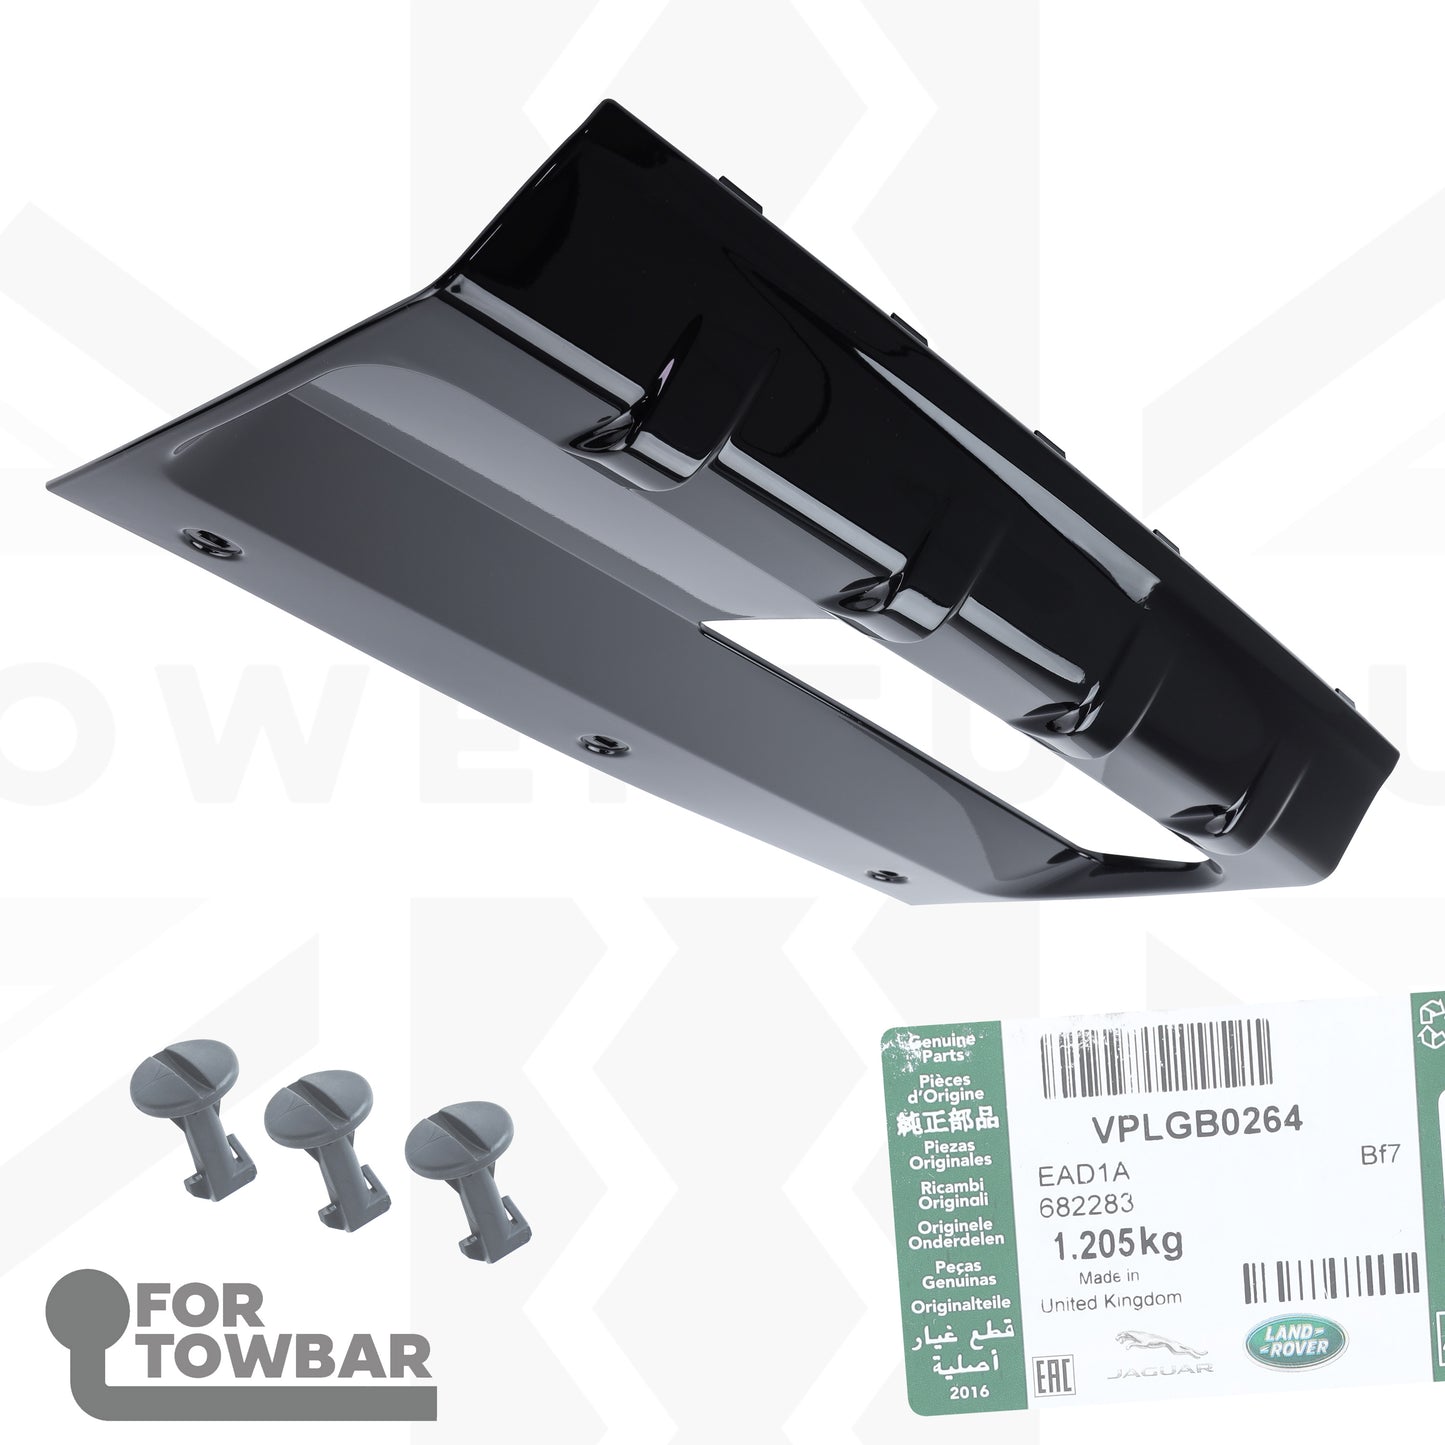 Genuine Tow Eye Cover with Deployable Towbar Cut-out for Range Rover L405 SVO